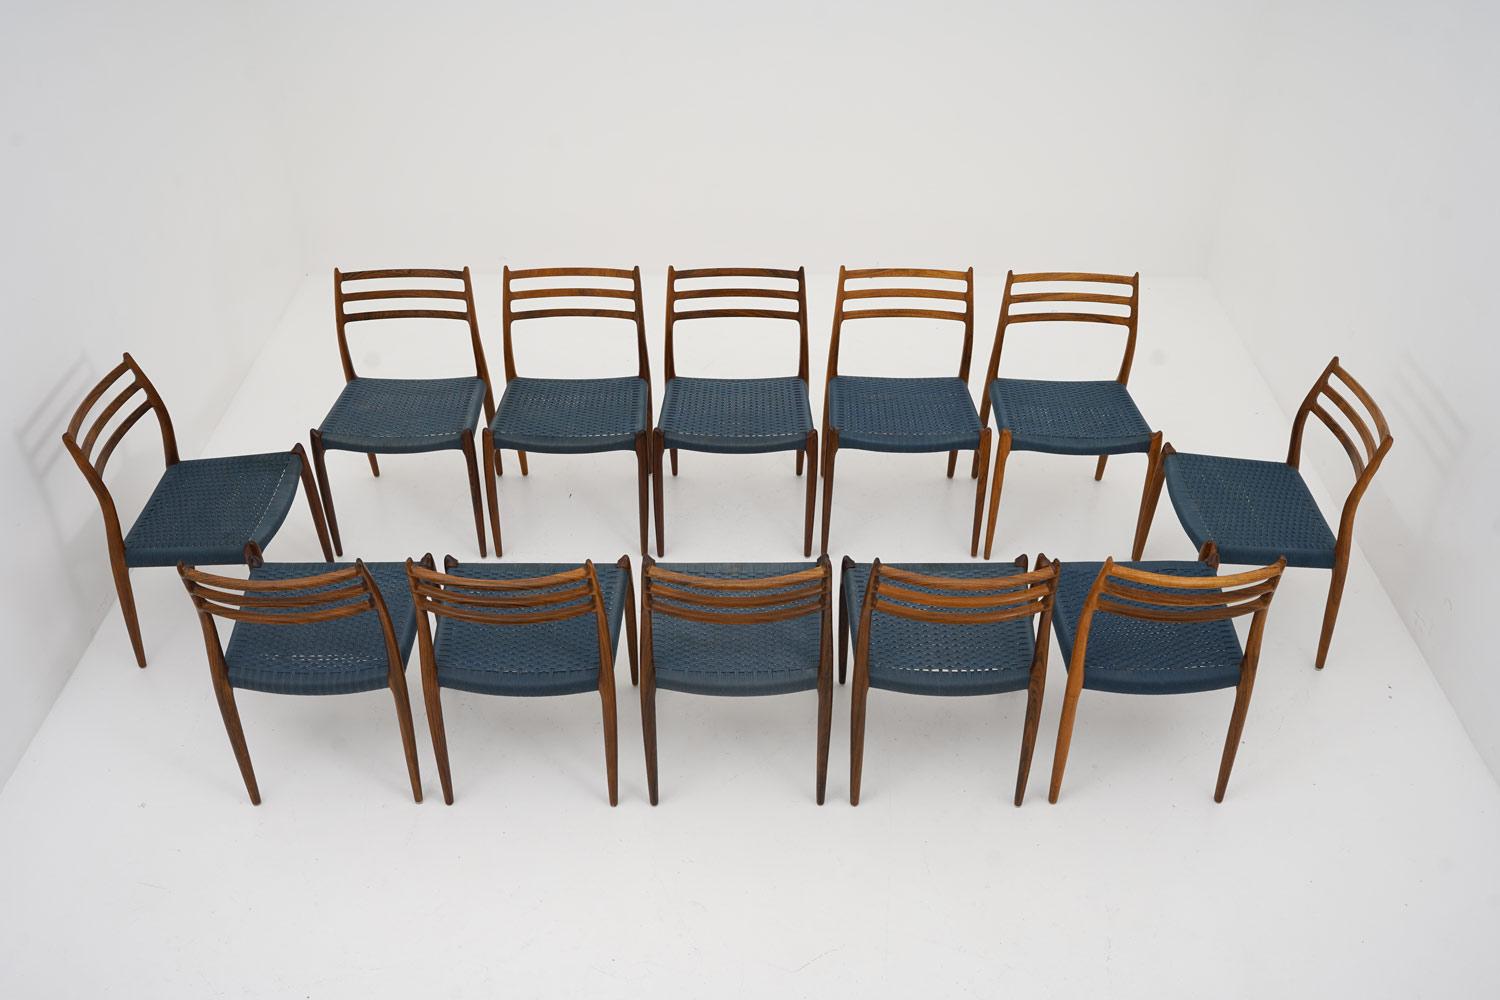 Rare set of 12 Scandinavian midcentury dining chairs model 78 by Niels Otto Møller, Denmark.
These sculptural rosewood chairs are constructed with an impressive sense for quality and design. 

Condition: The wood is in very good original condition,